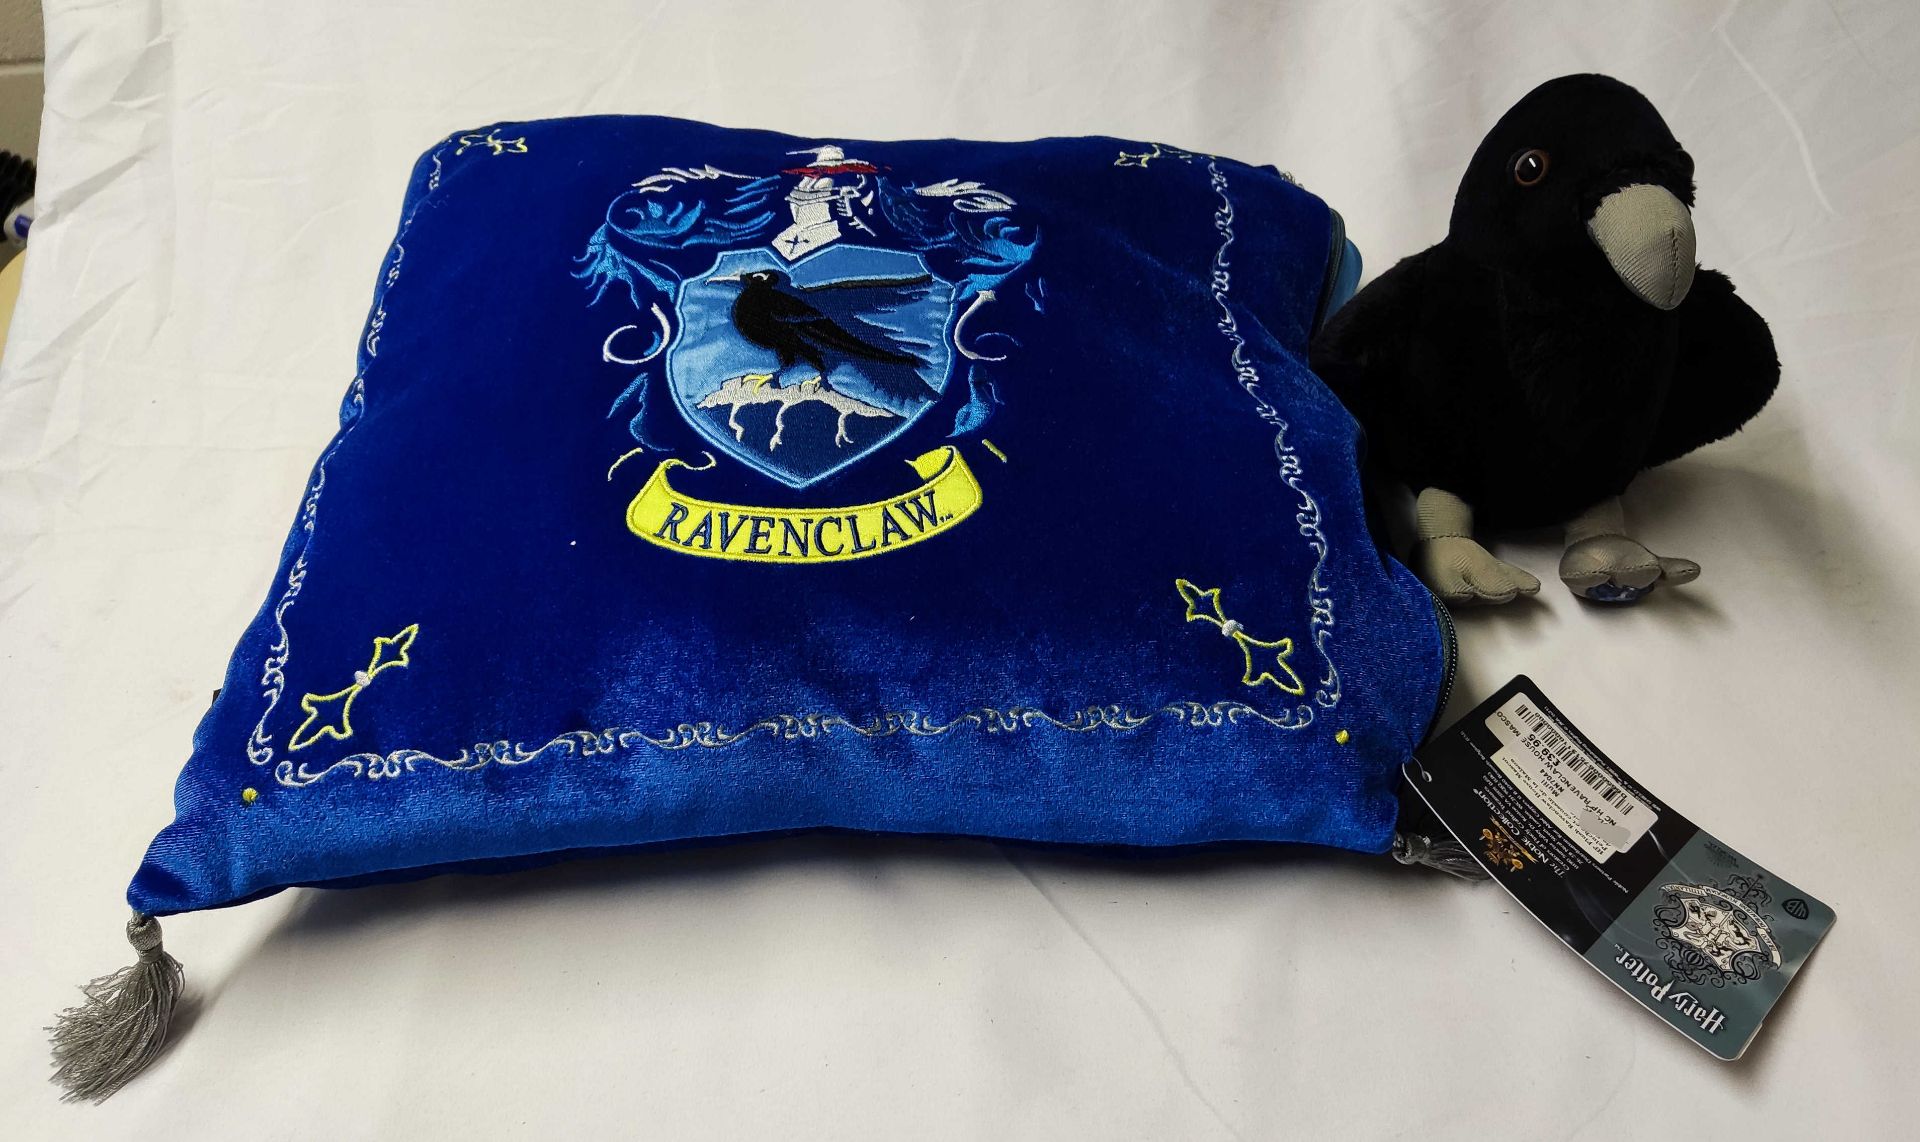 1 x NOBLE COLLECTION Harry Potter Ravenclaw House Mascot Cushion - New/Unused - RRP £39.95 - Ref: / - Image 2 of 11